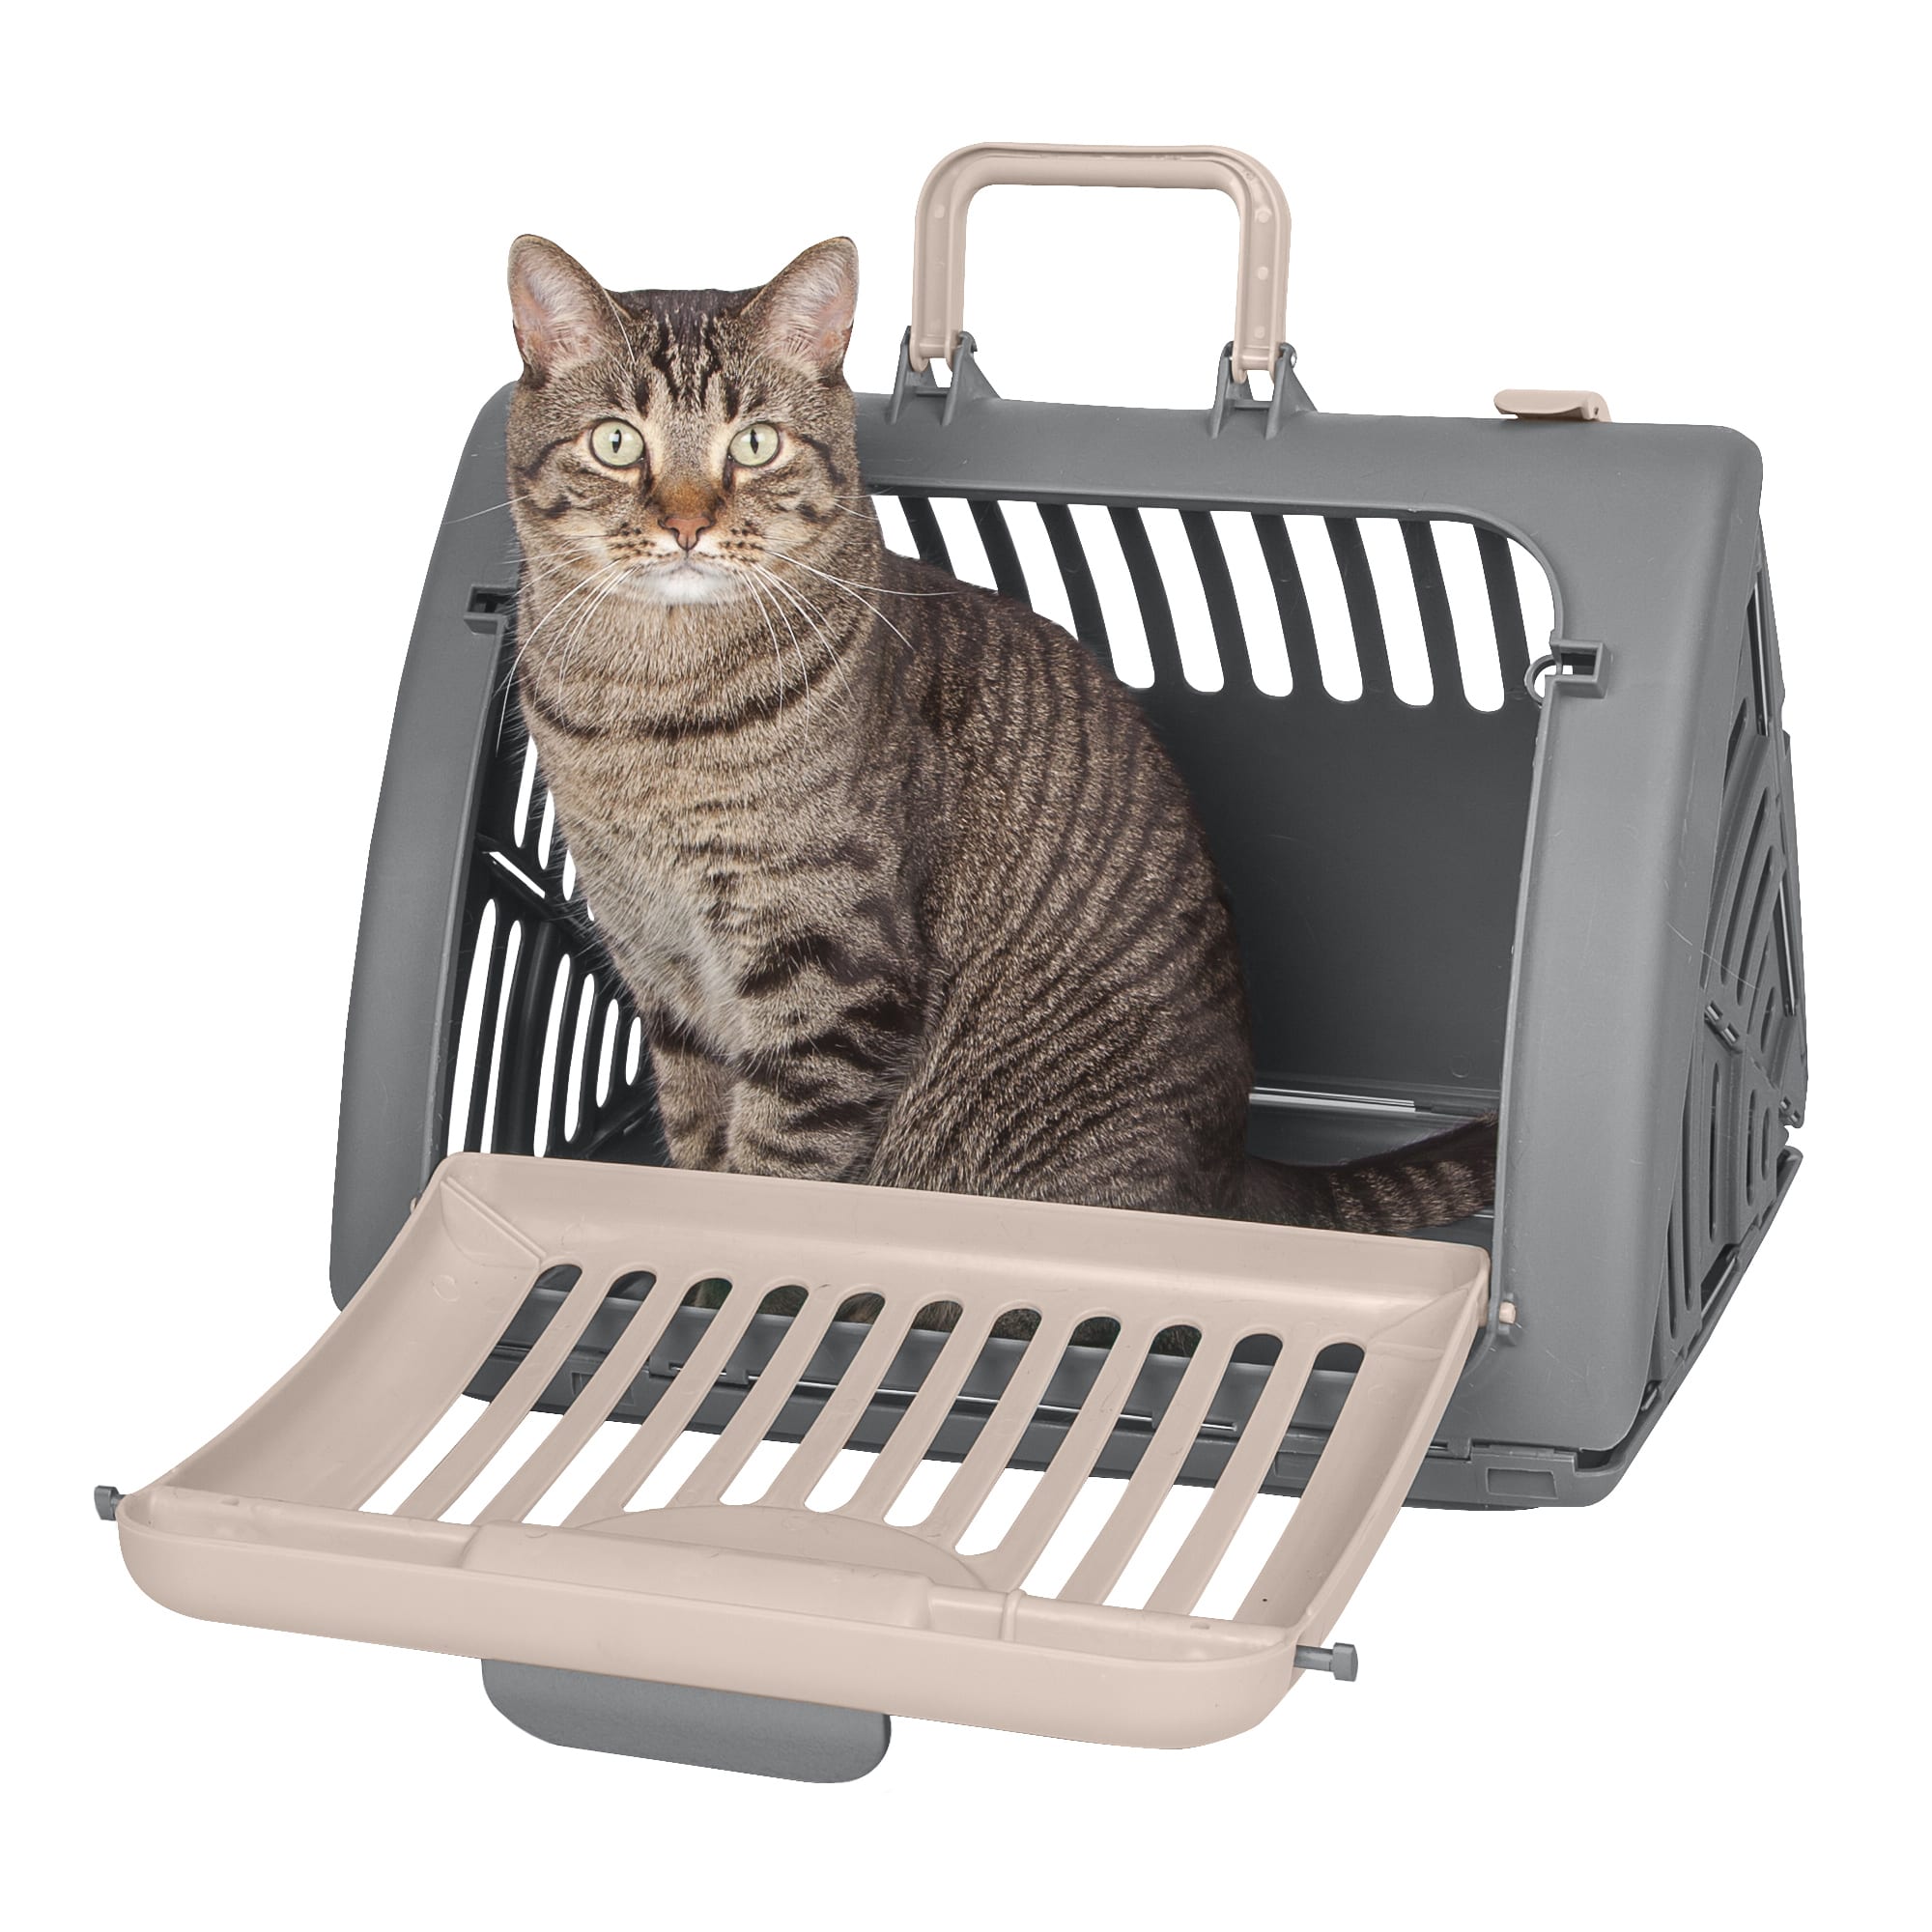 Sportpet Cat Carrier and Home 